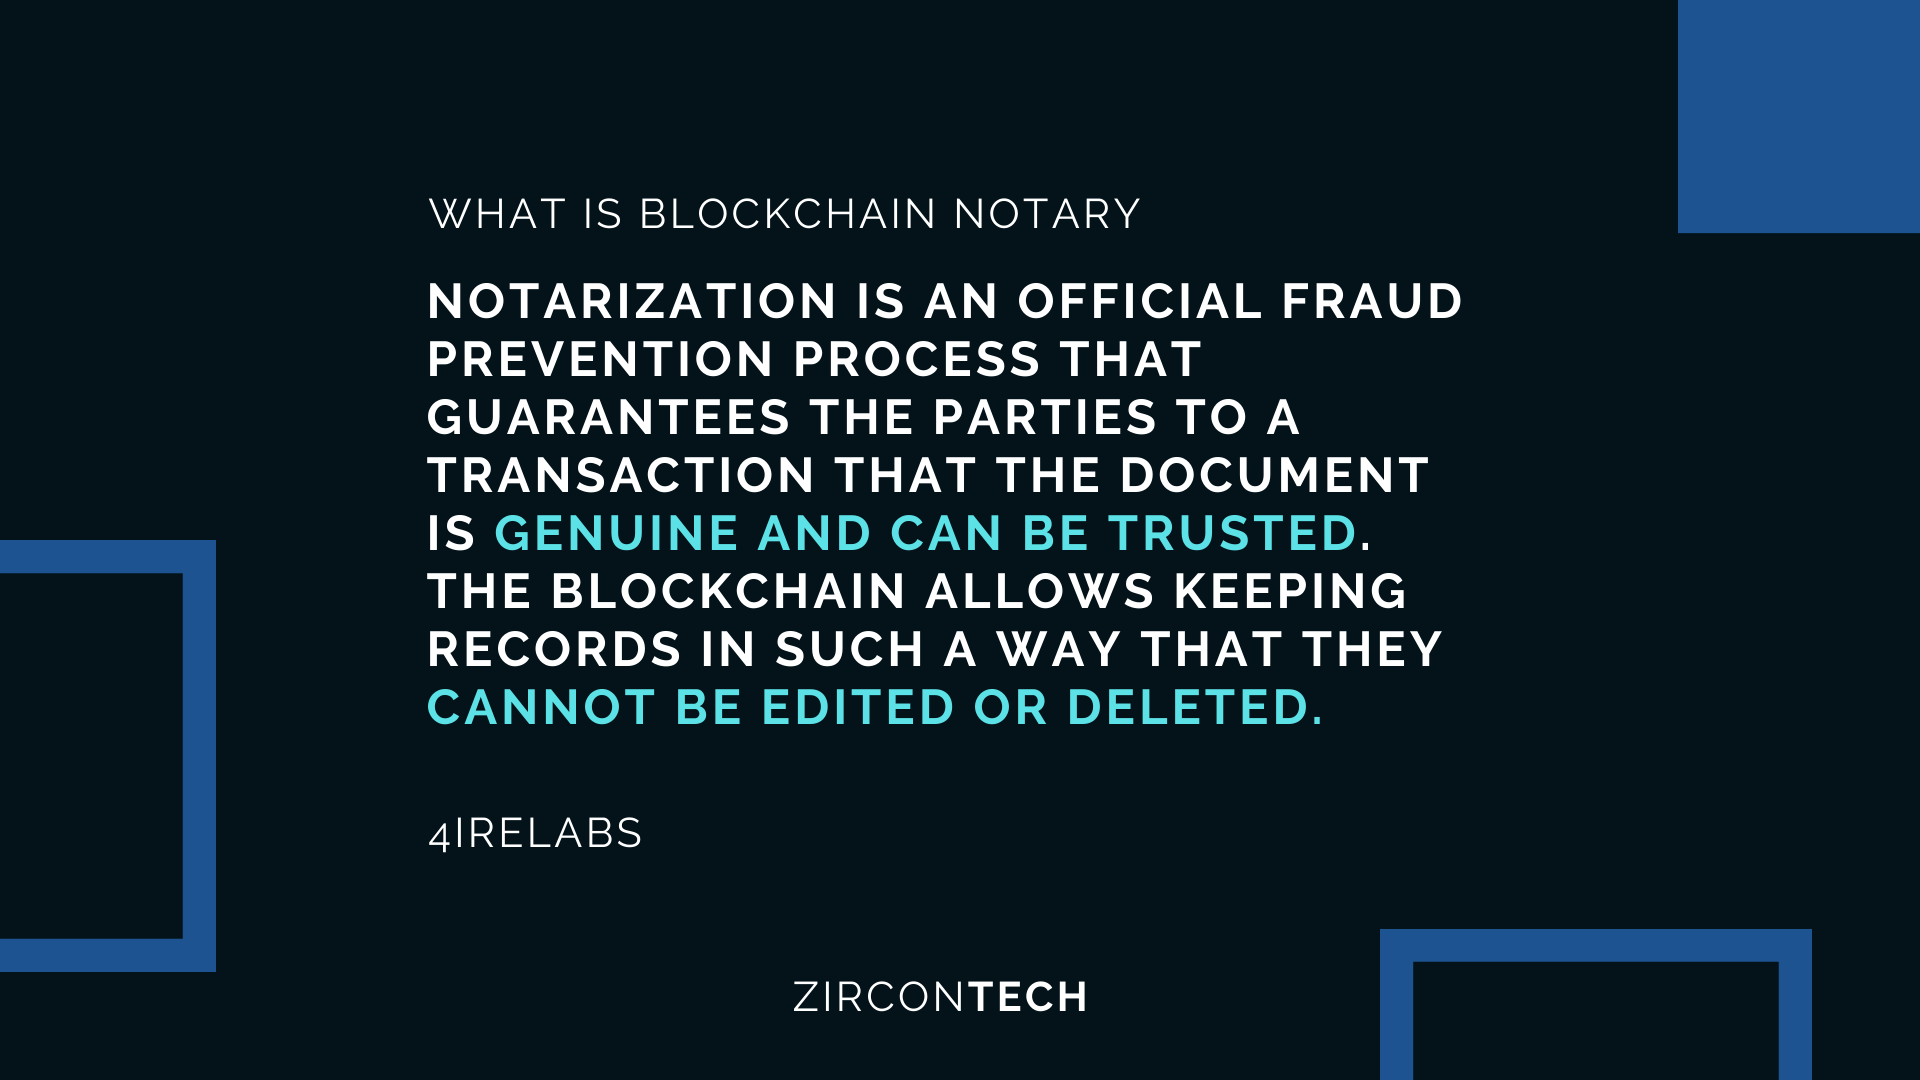 Blockchain notary, official fraud prevention process. Blockchain allows keeping records that cannot be edited or deleted